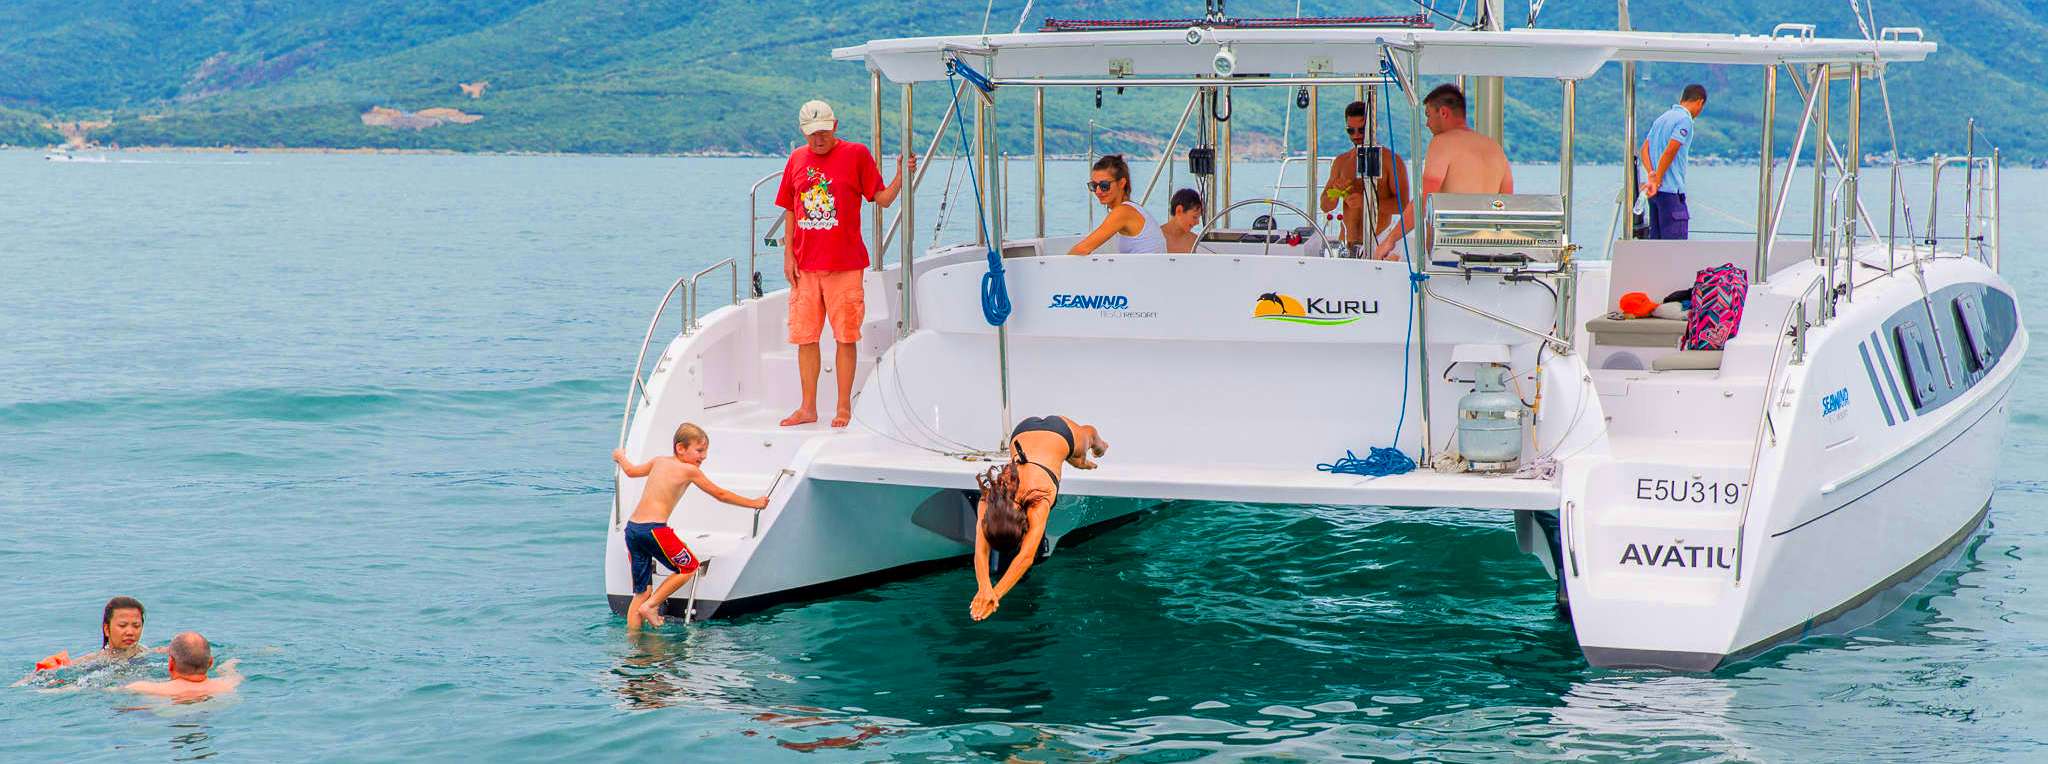 Who wouldn't want to spend their days on the water, meeting friendly holidaymakers, making new friends and doing what makes you happy? The 1160 Resort from Seawind Catamarans offers up to 43pax